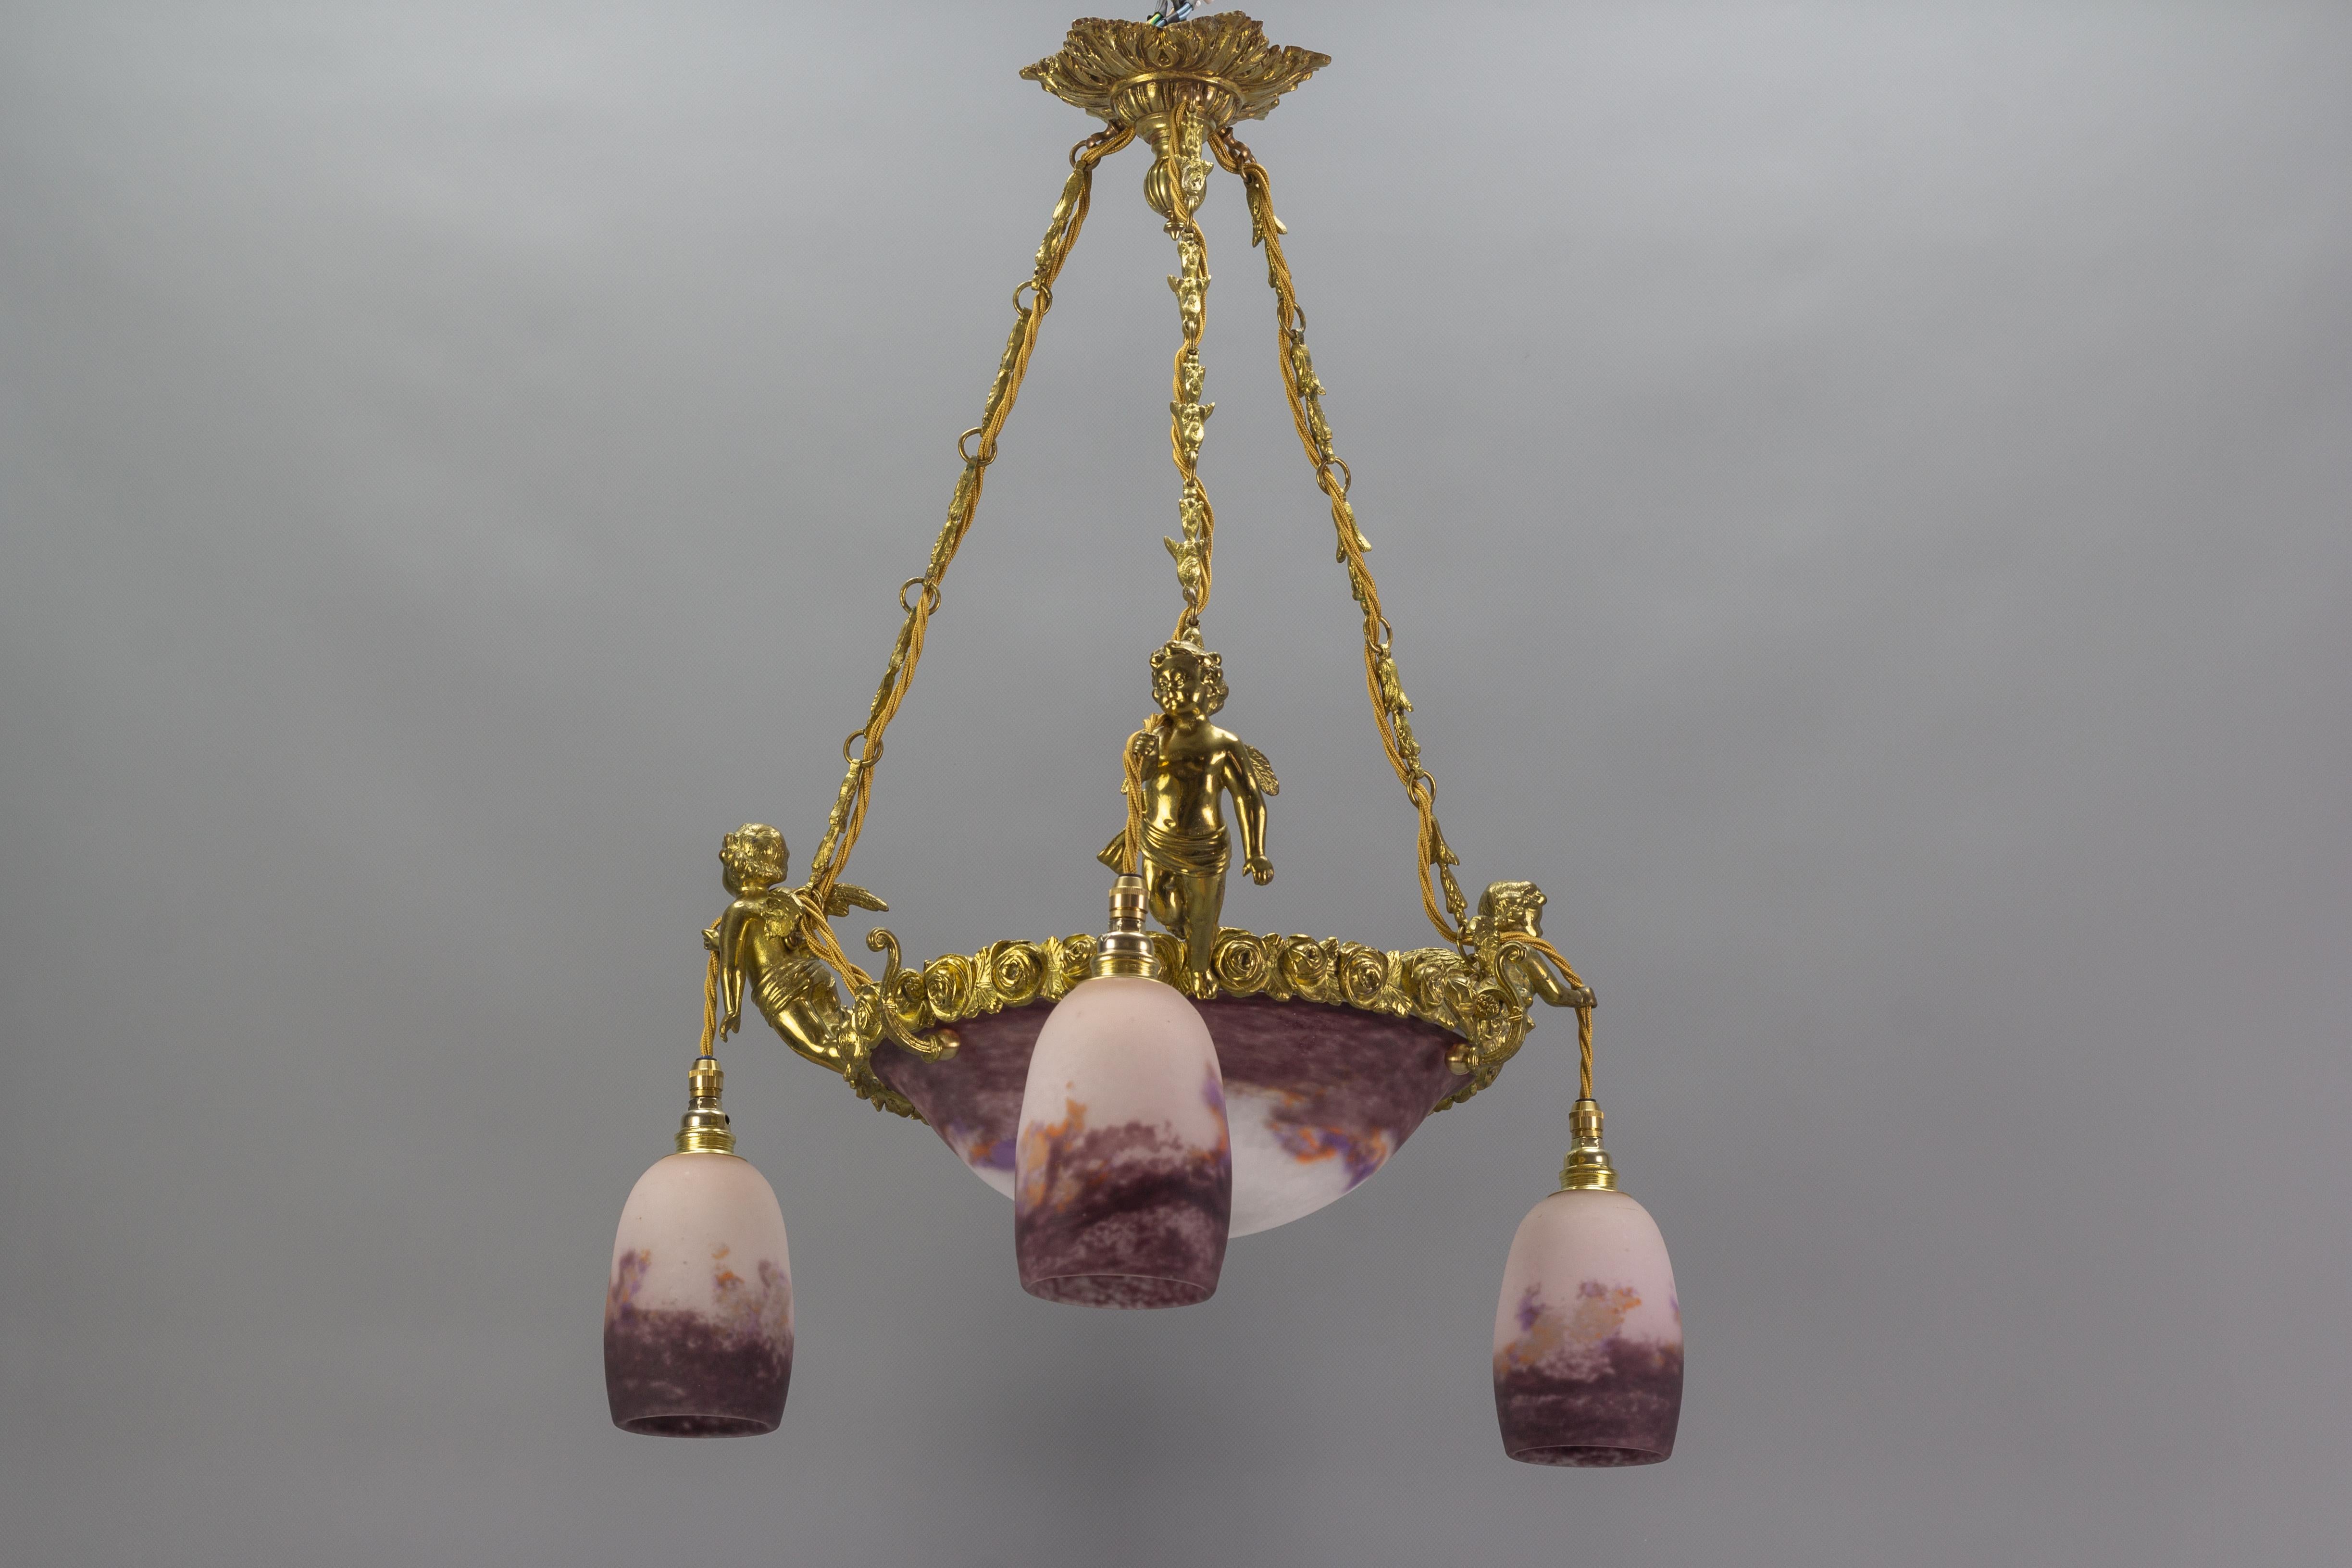 This absolutely delightful French Art Nouveau four-light chandelier features an ornate bronze fixture adorned with roses and three cherubs, each holding a light with a glass lampshade; and an interior light that brightens the beautiful dark violet,